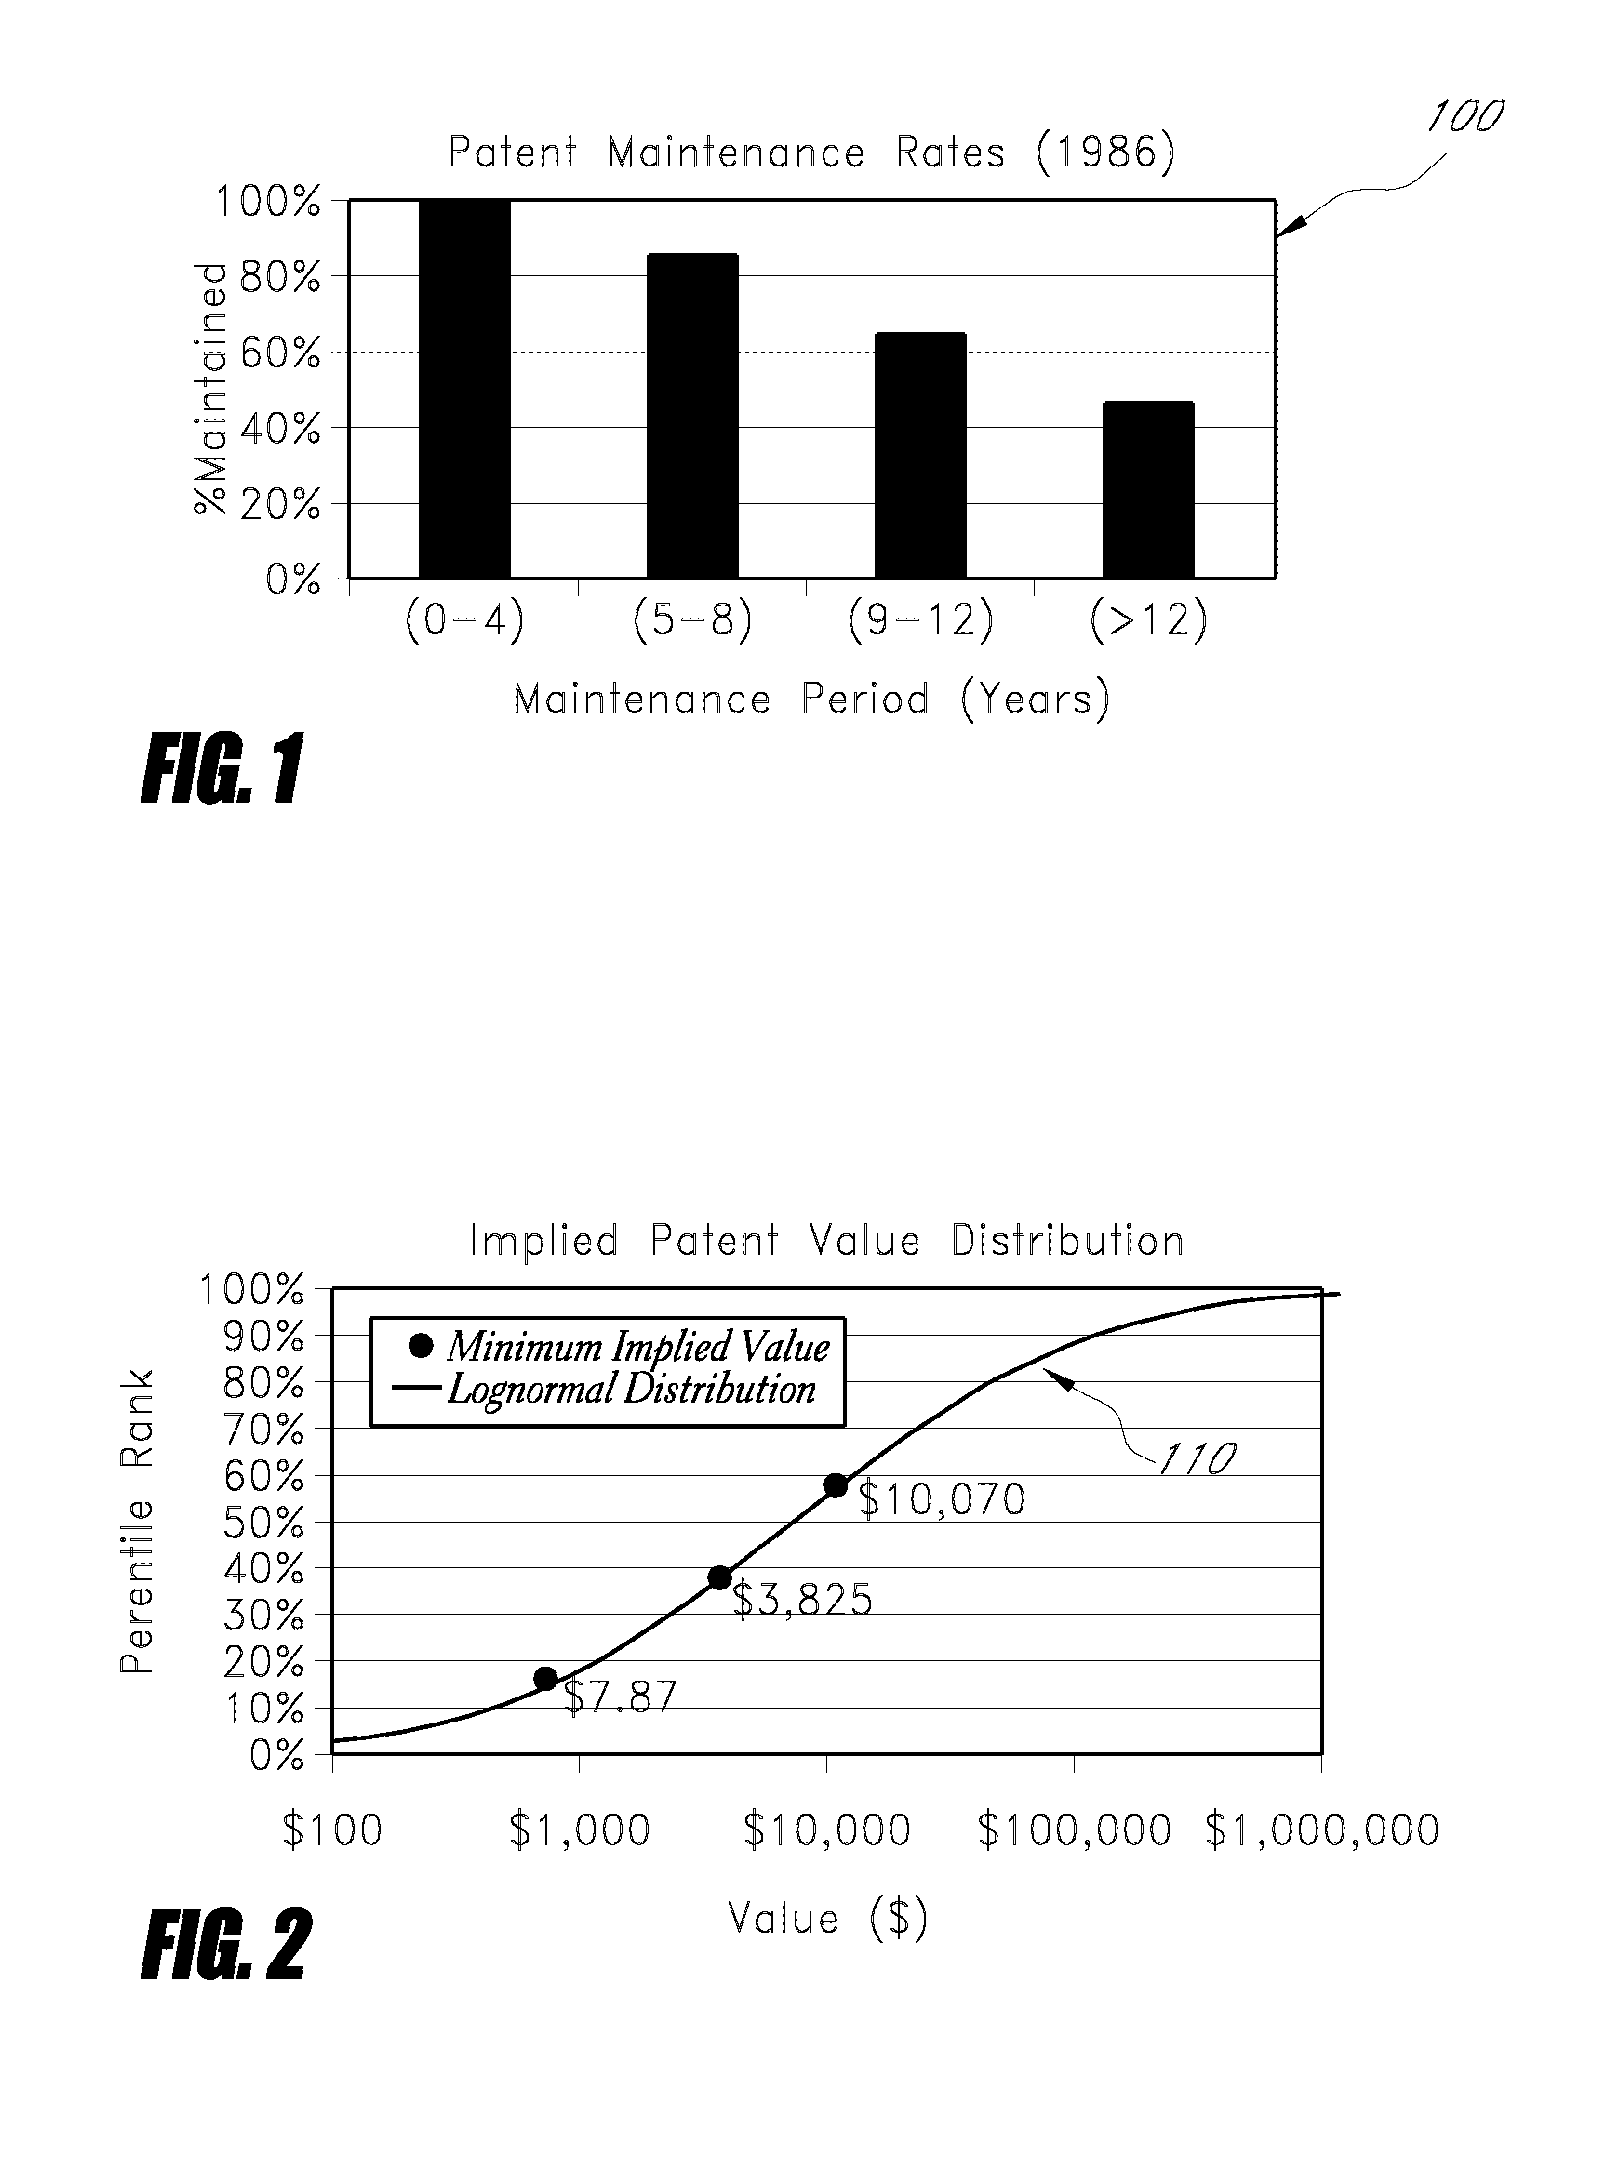 Method and system for valuing intangible assets